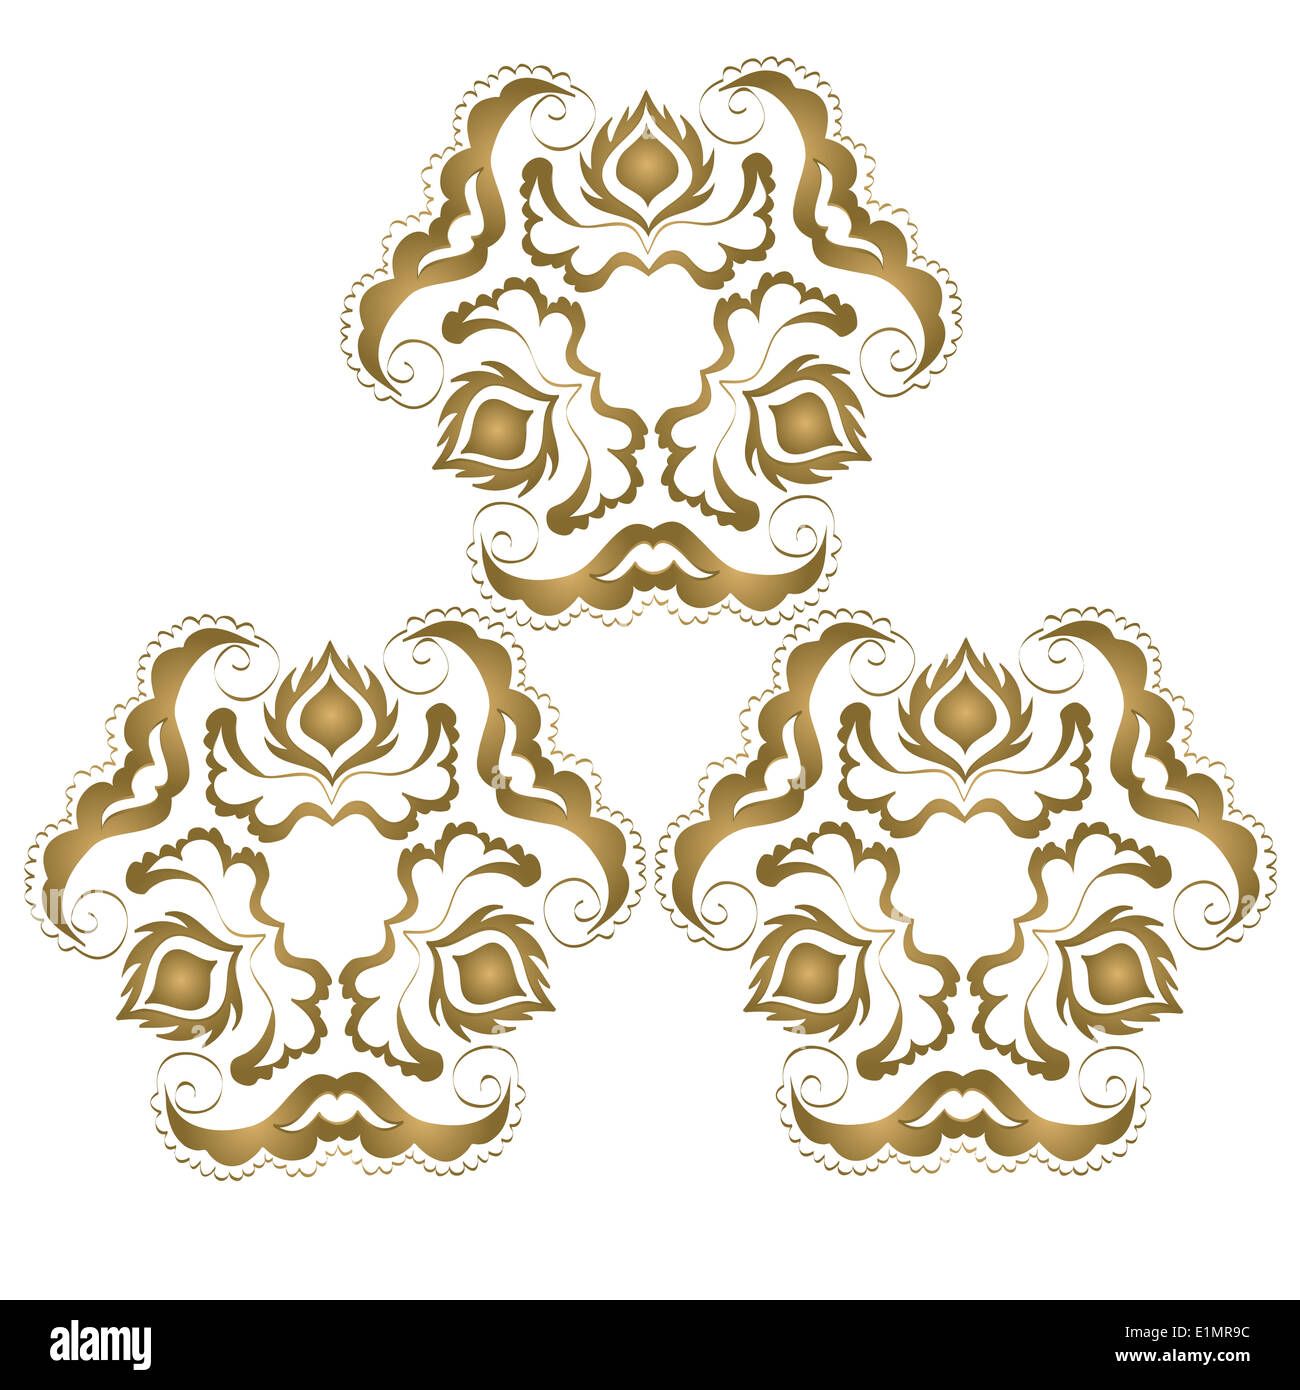 vintage seamless pattern with Victorian motif Stock Photo